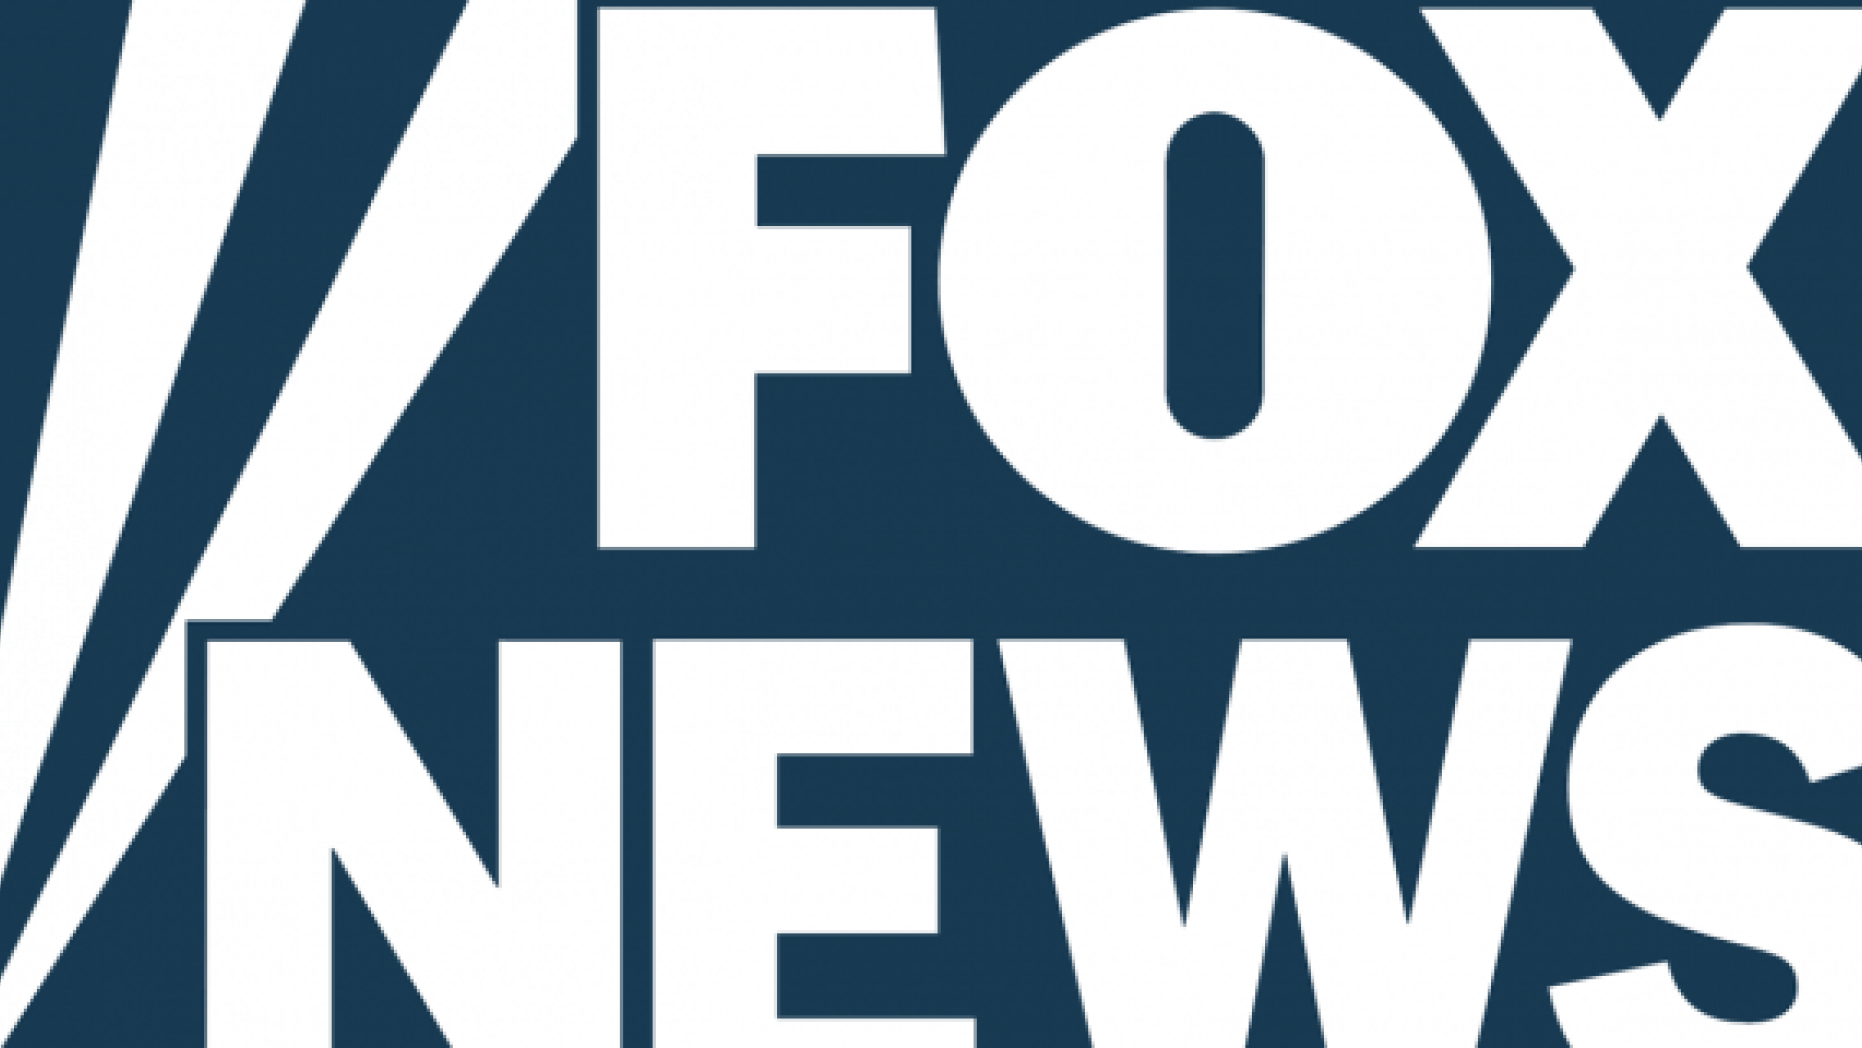 Fox Network Logo - Fox News Channel marks milestone as top cable news network for 17